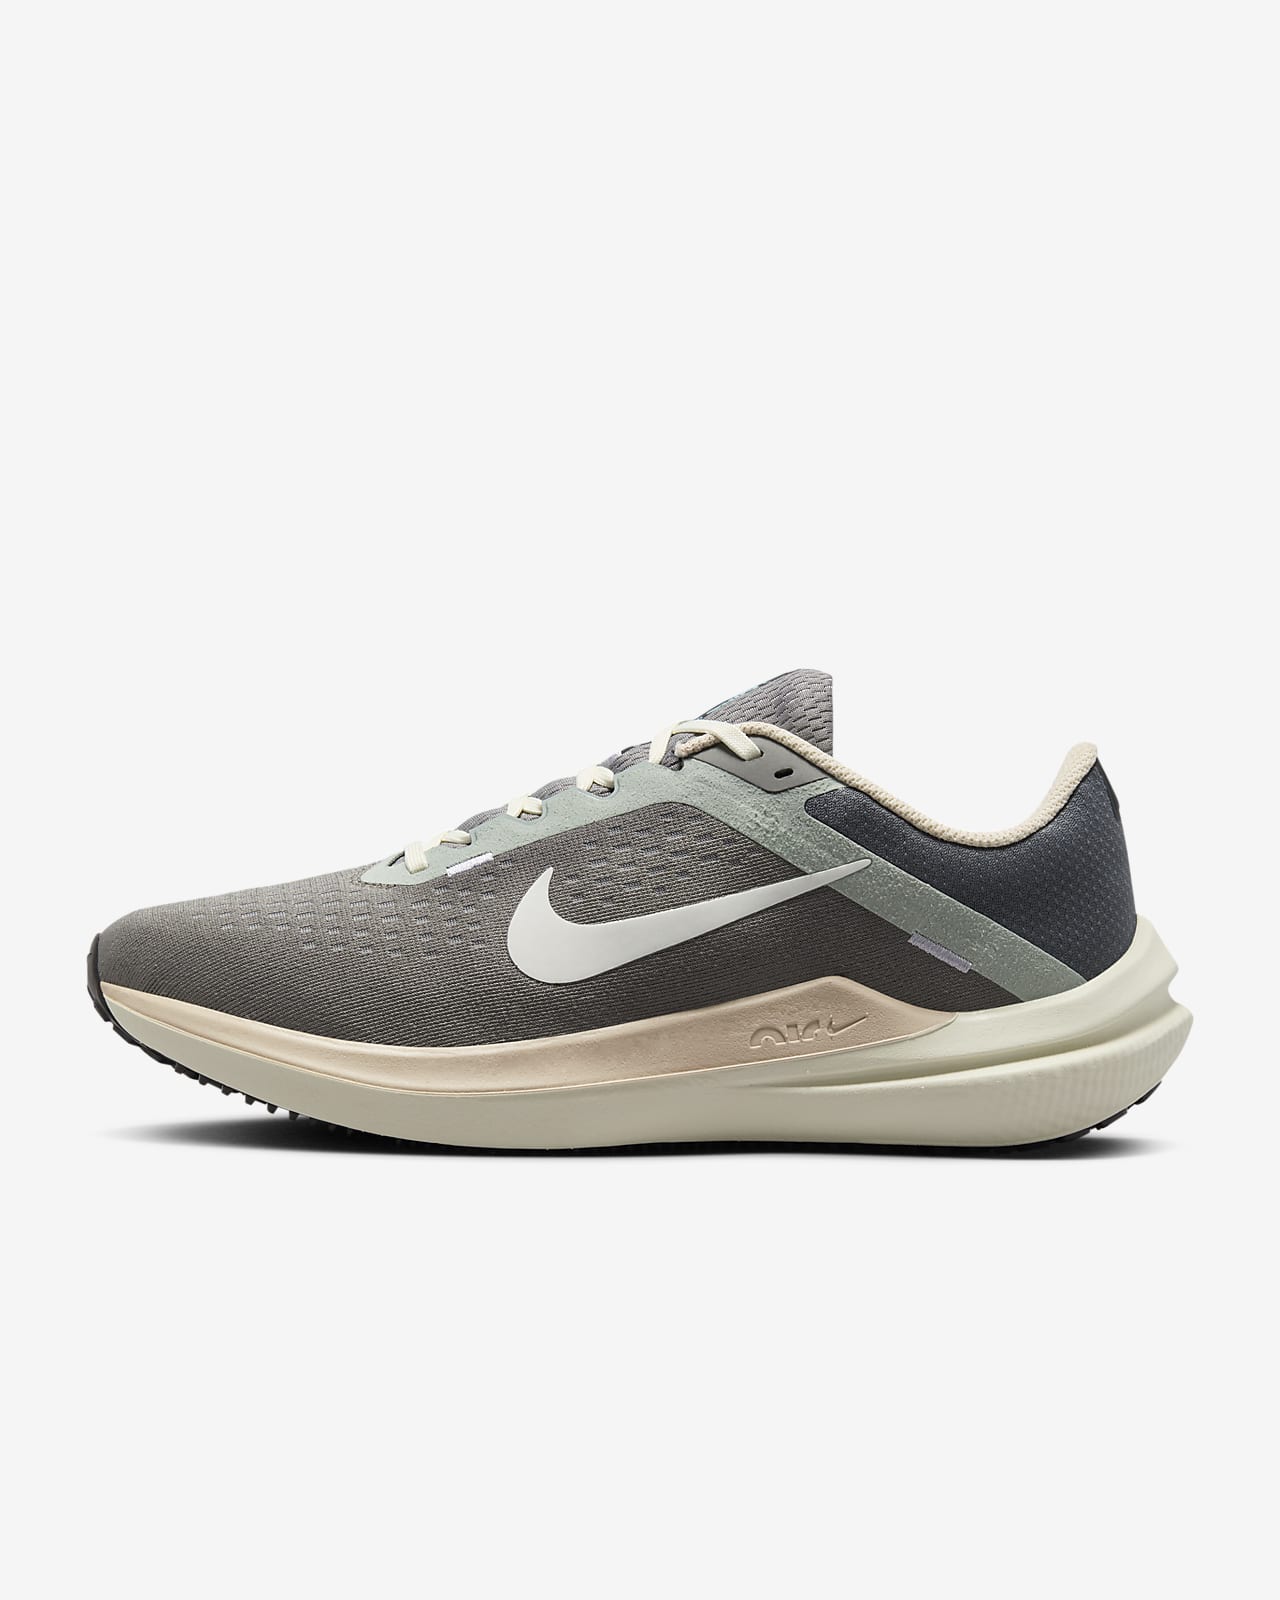 Nike | Air Winflo 10 Men's Road Running Shoes | Everyday Neutral Road Running  Shoes | SportsDirect.com